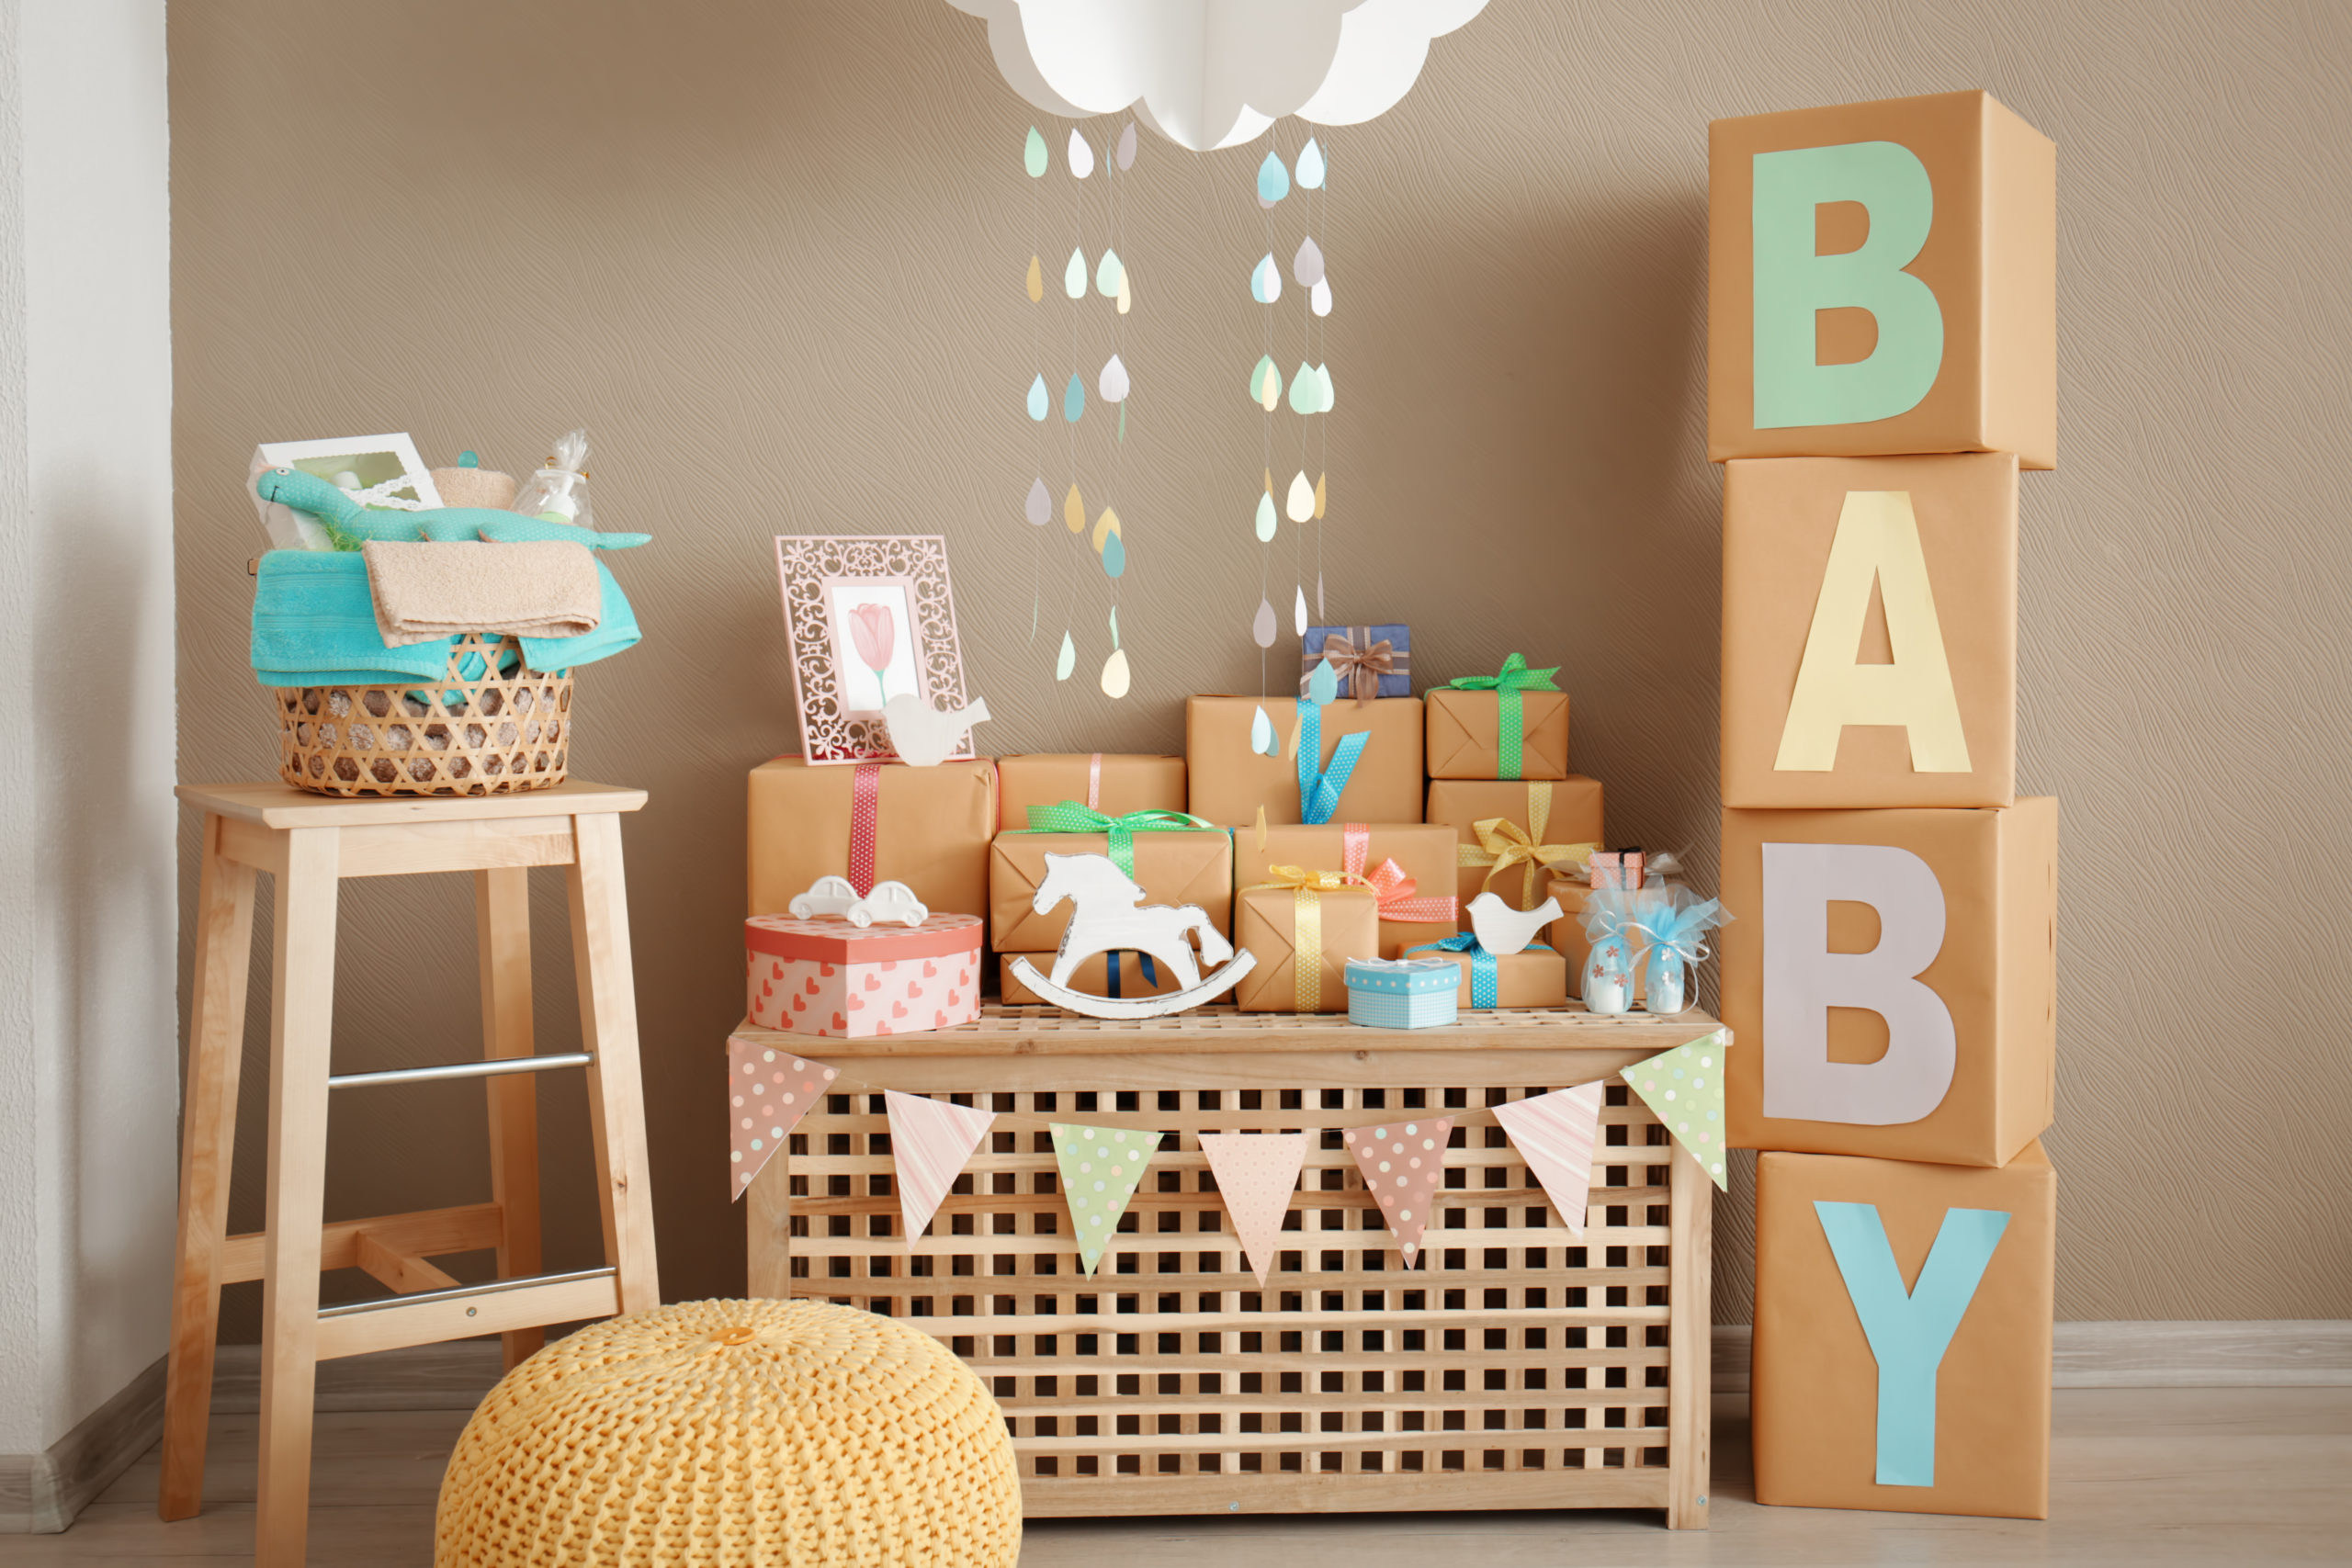 Baby shower decorations, gifts, and food options at indoor celebration.